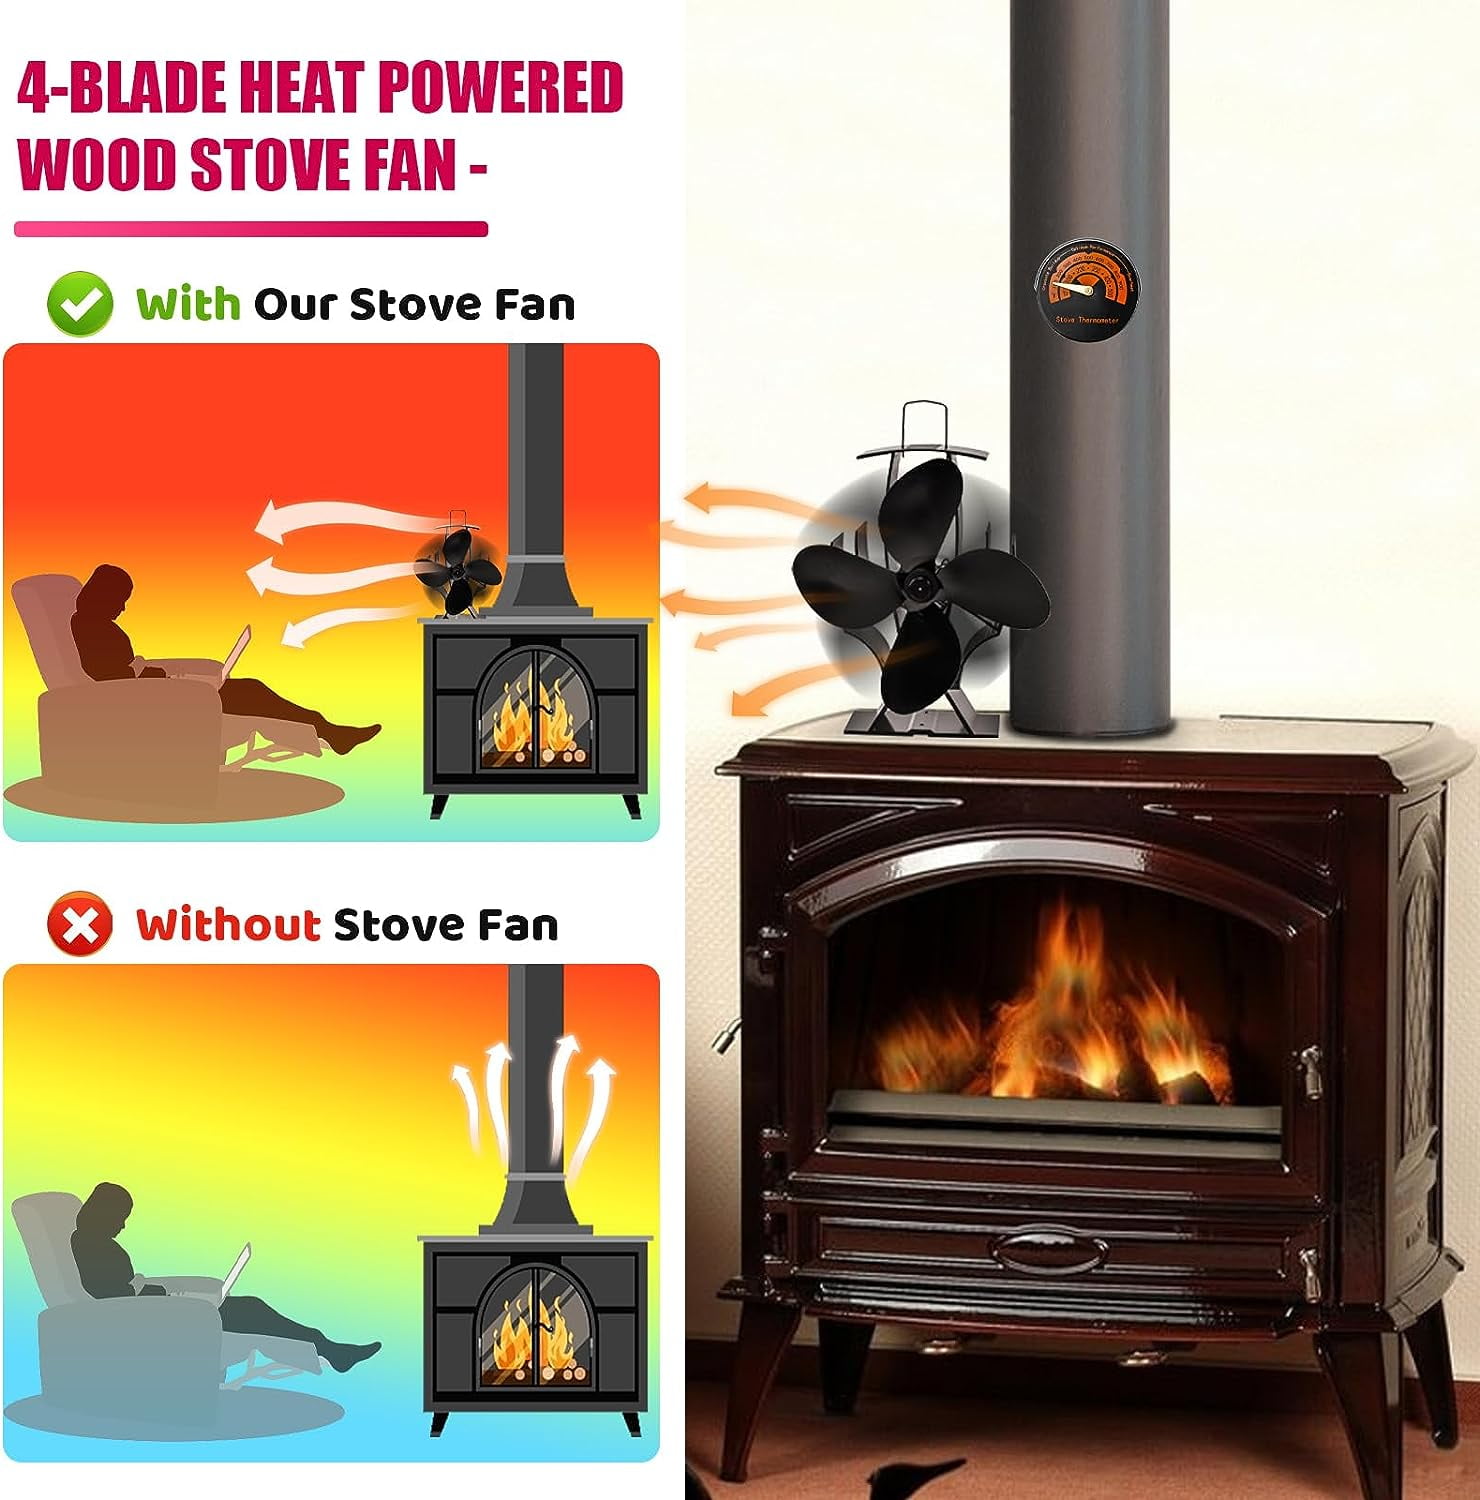 Twin Blade Heat Powered Wood Burning Stove Fan by Sonyabecca Review 